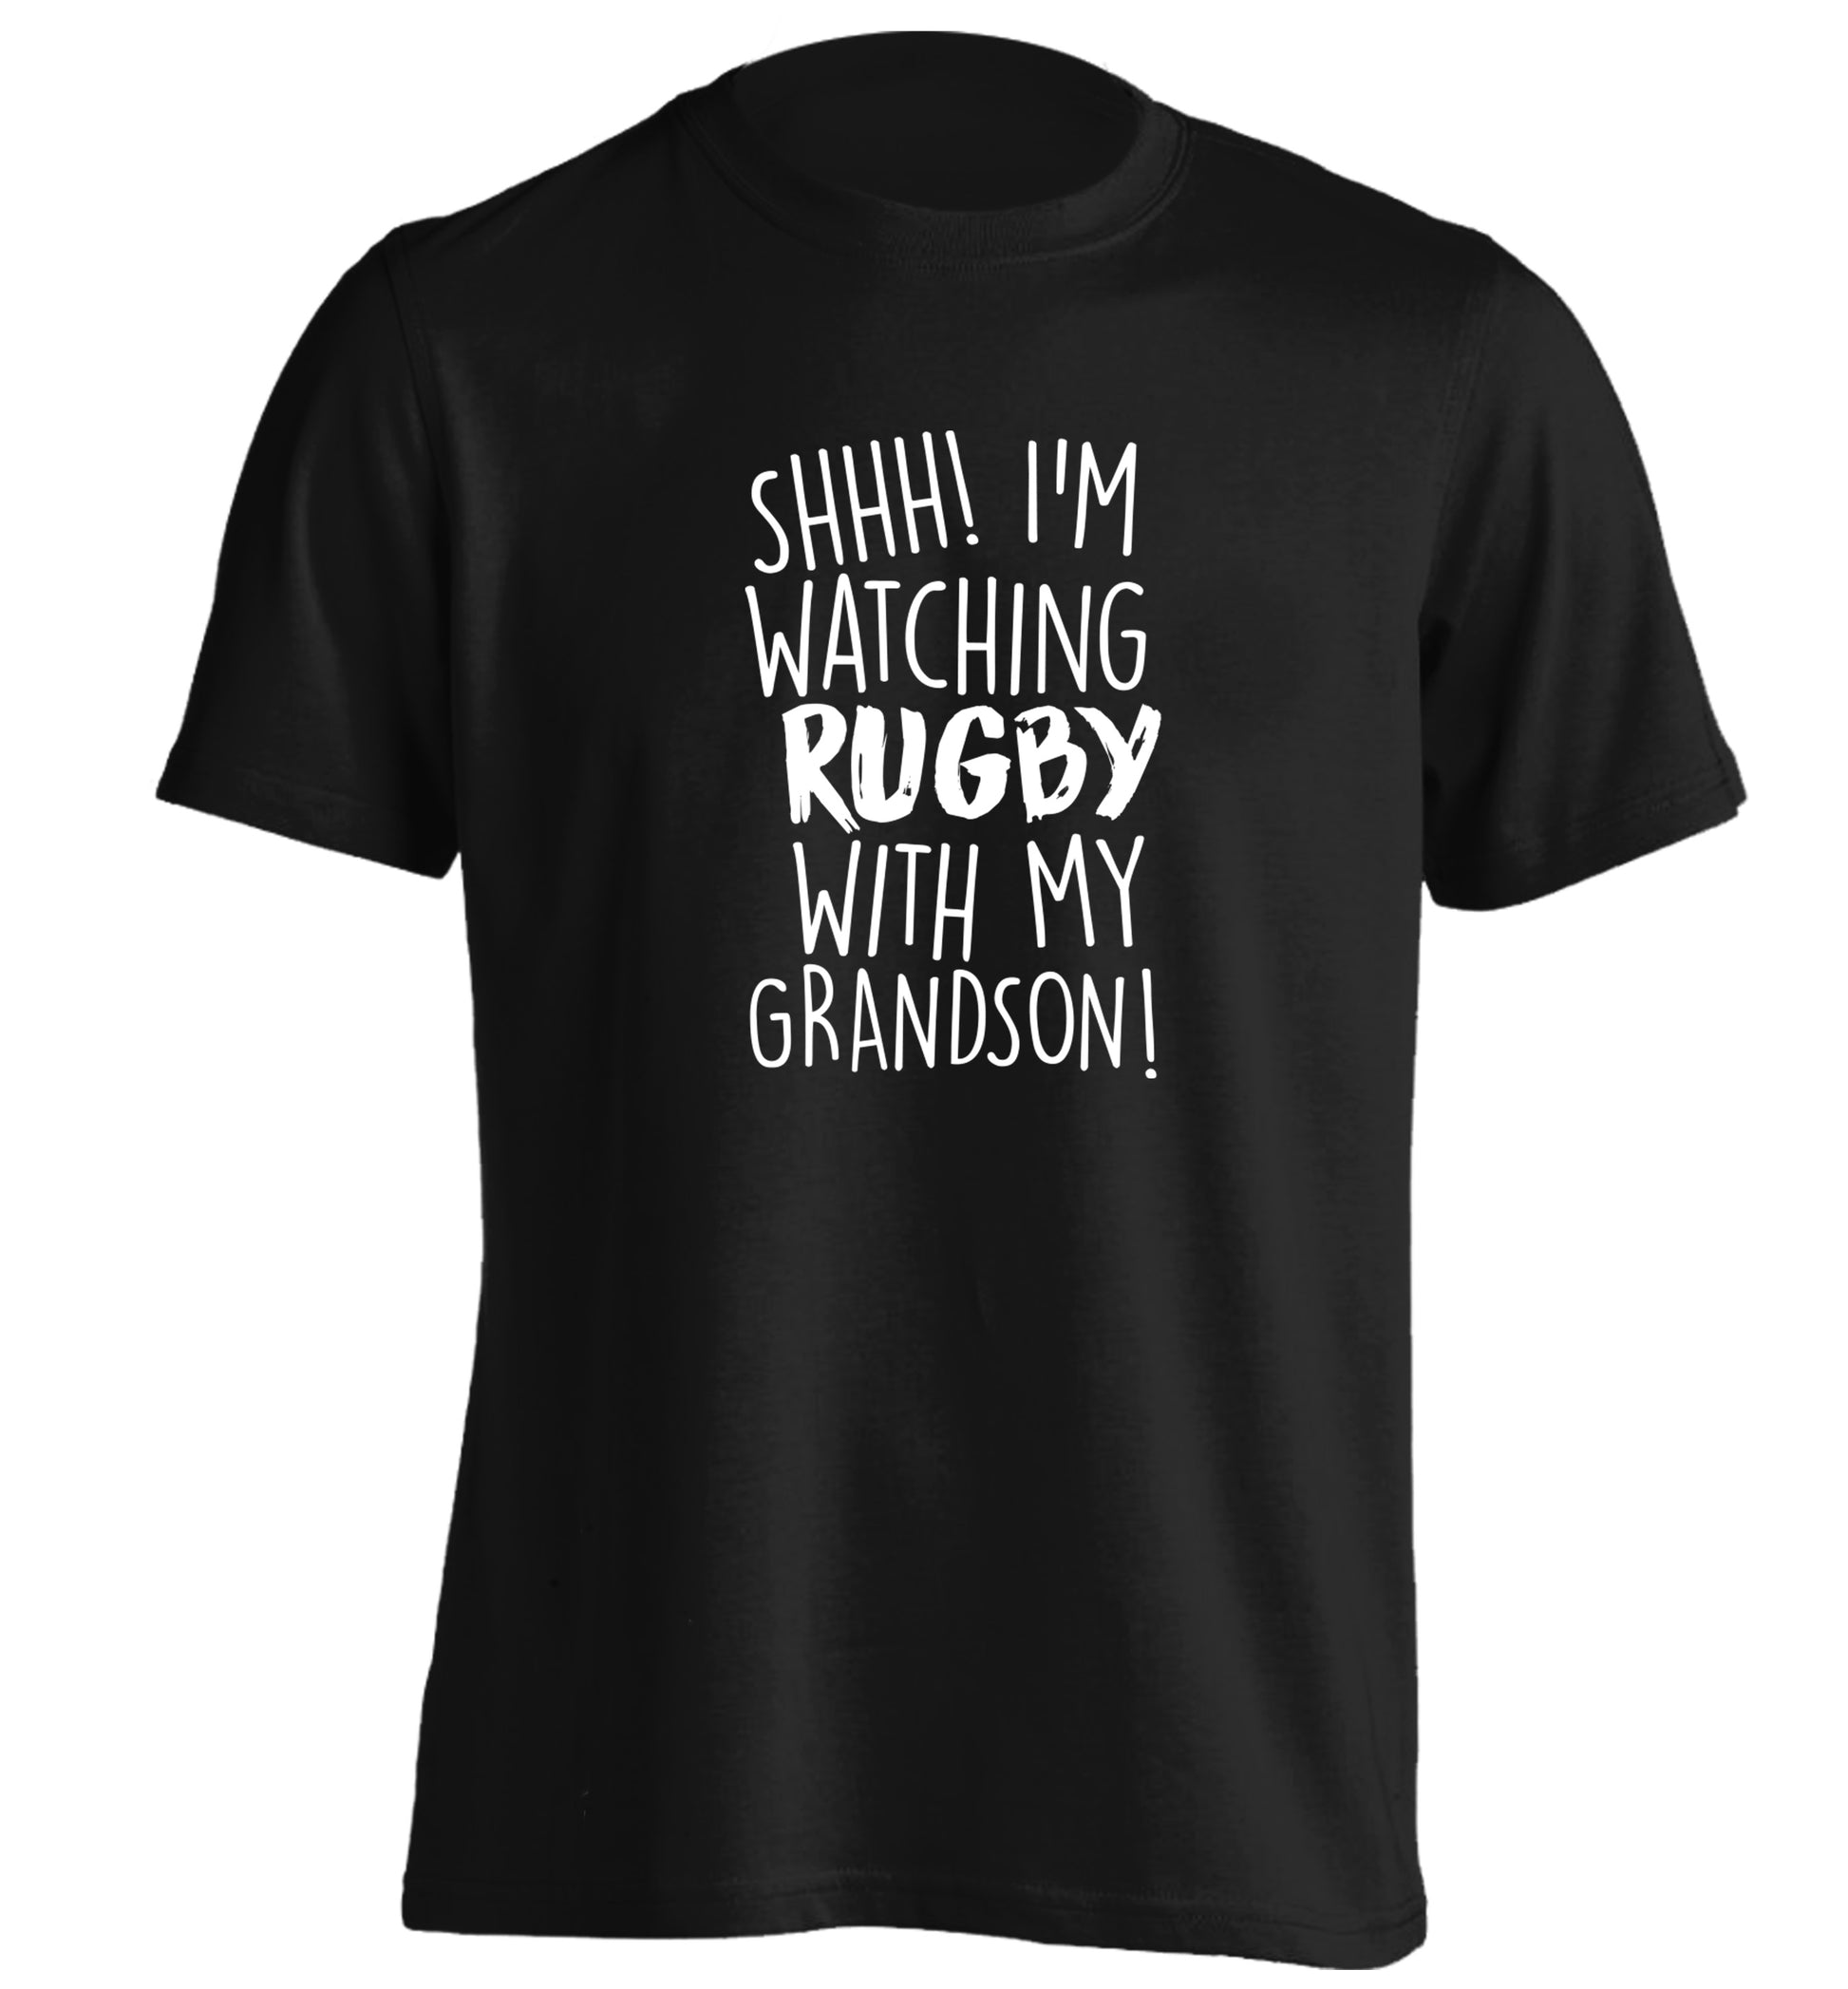 Shh I'm watching rugby with my grandson adults unisex black Tshirt 2XL